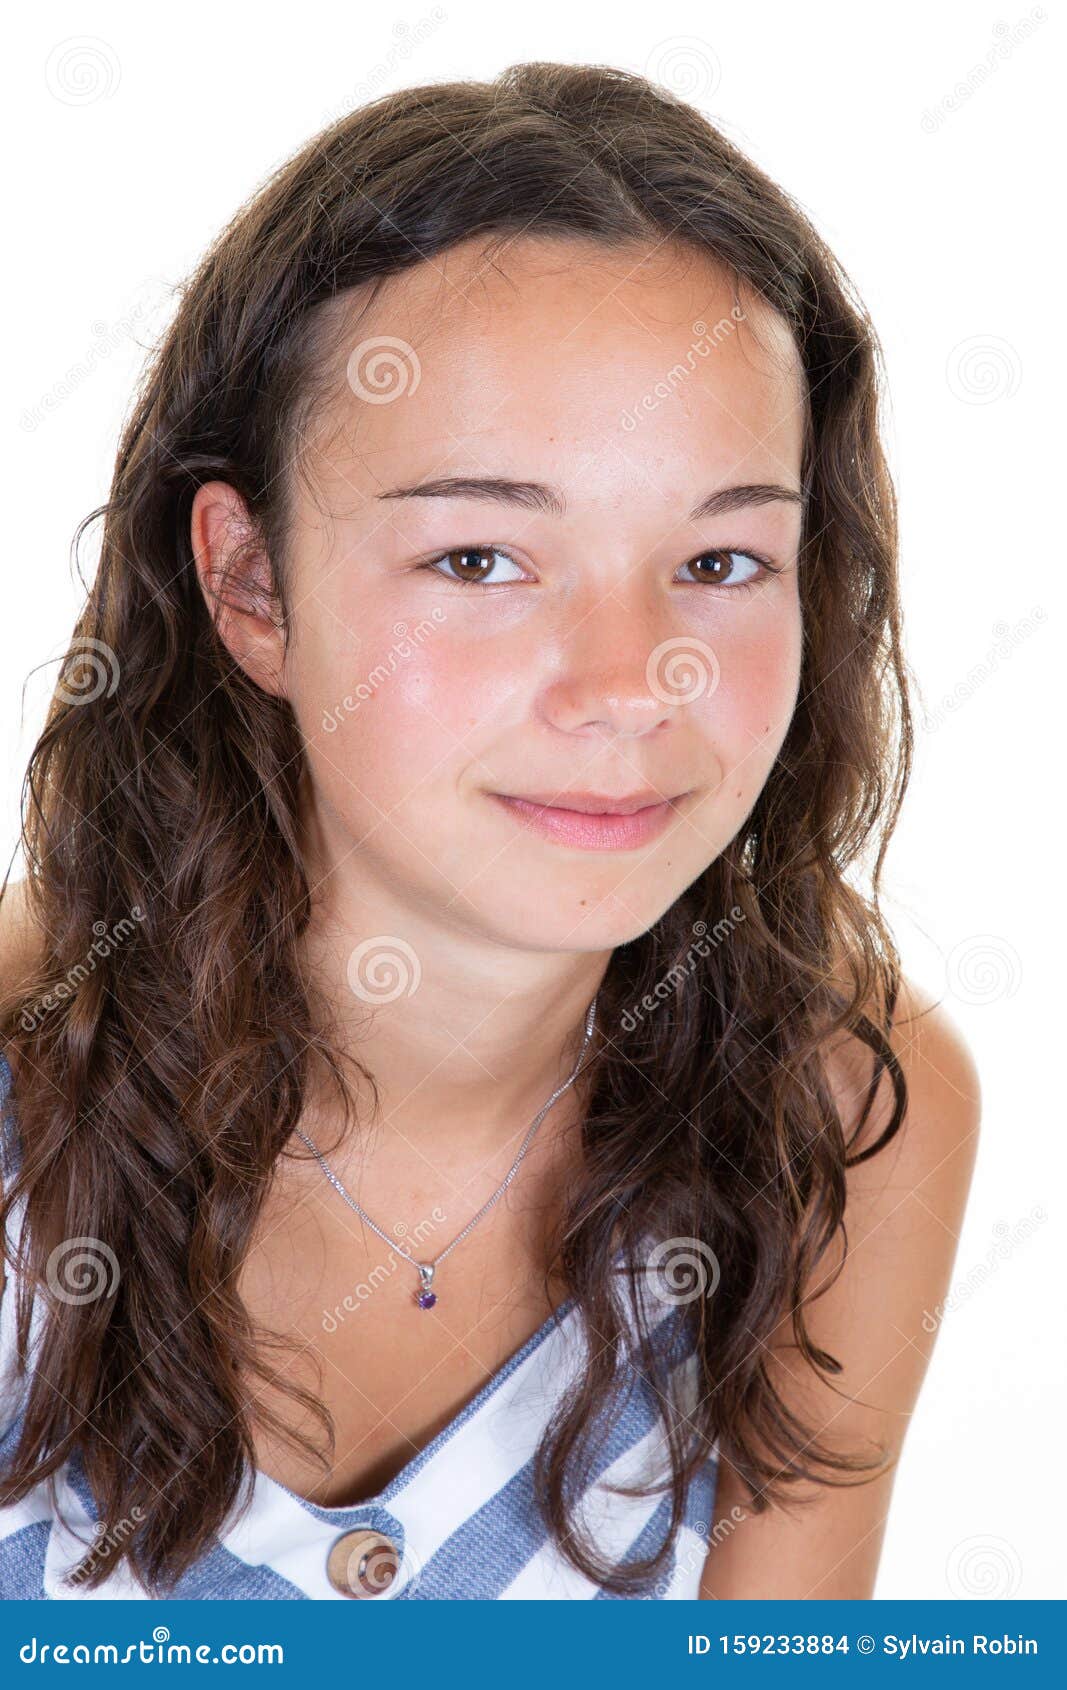 Portrait of a Normal Girl Smiling Posing on White Background Stock ...